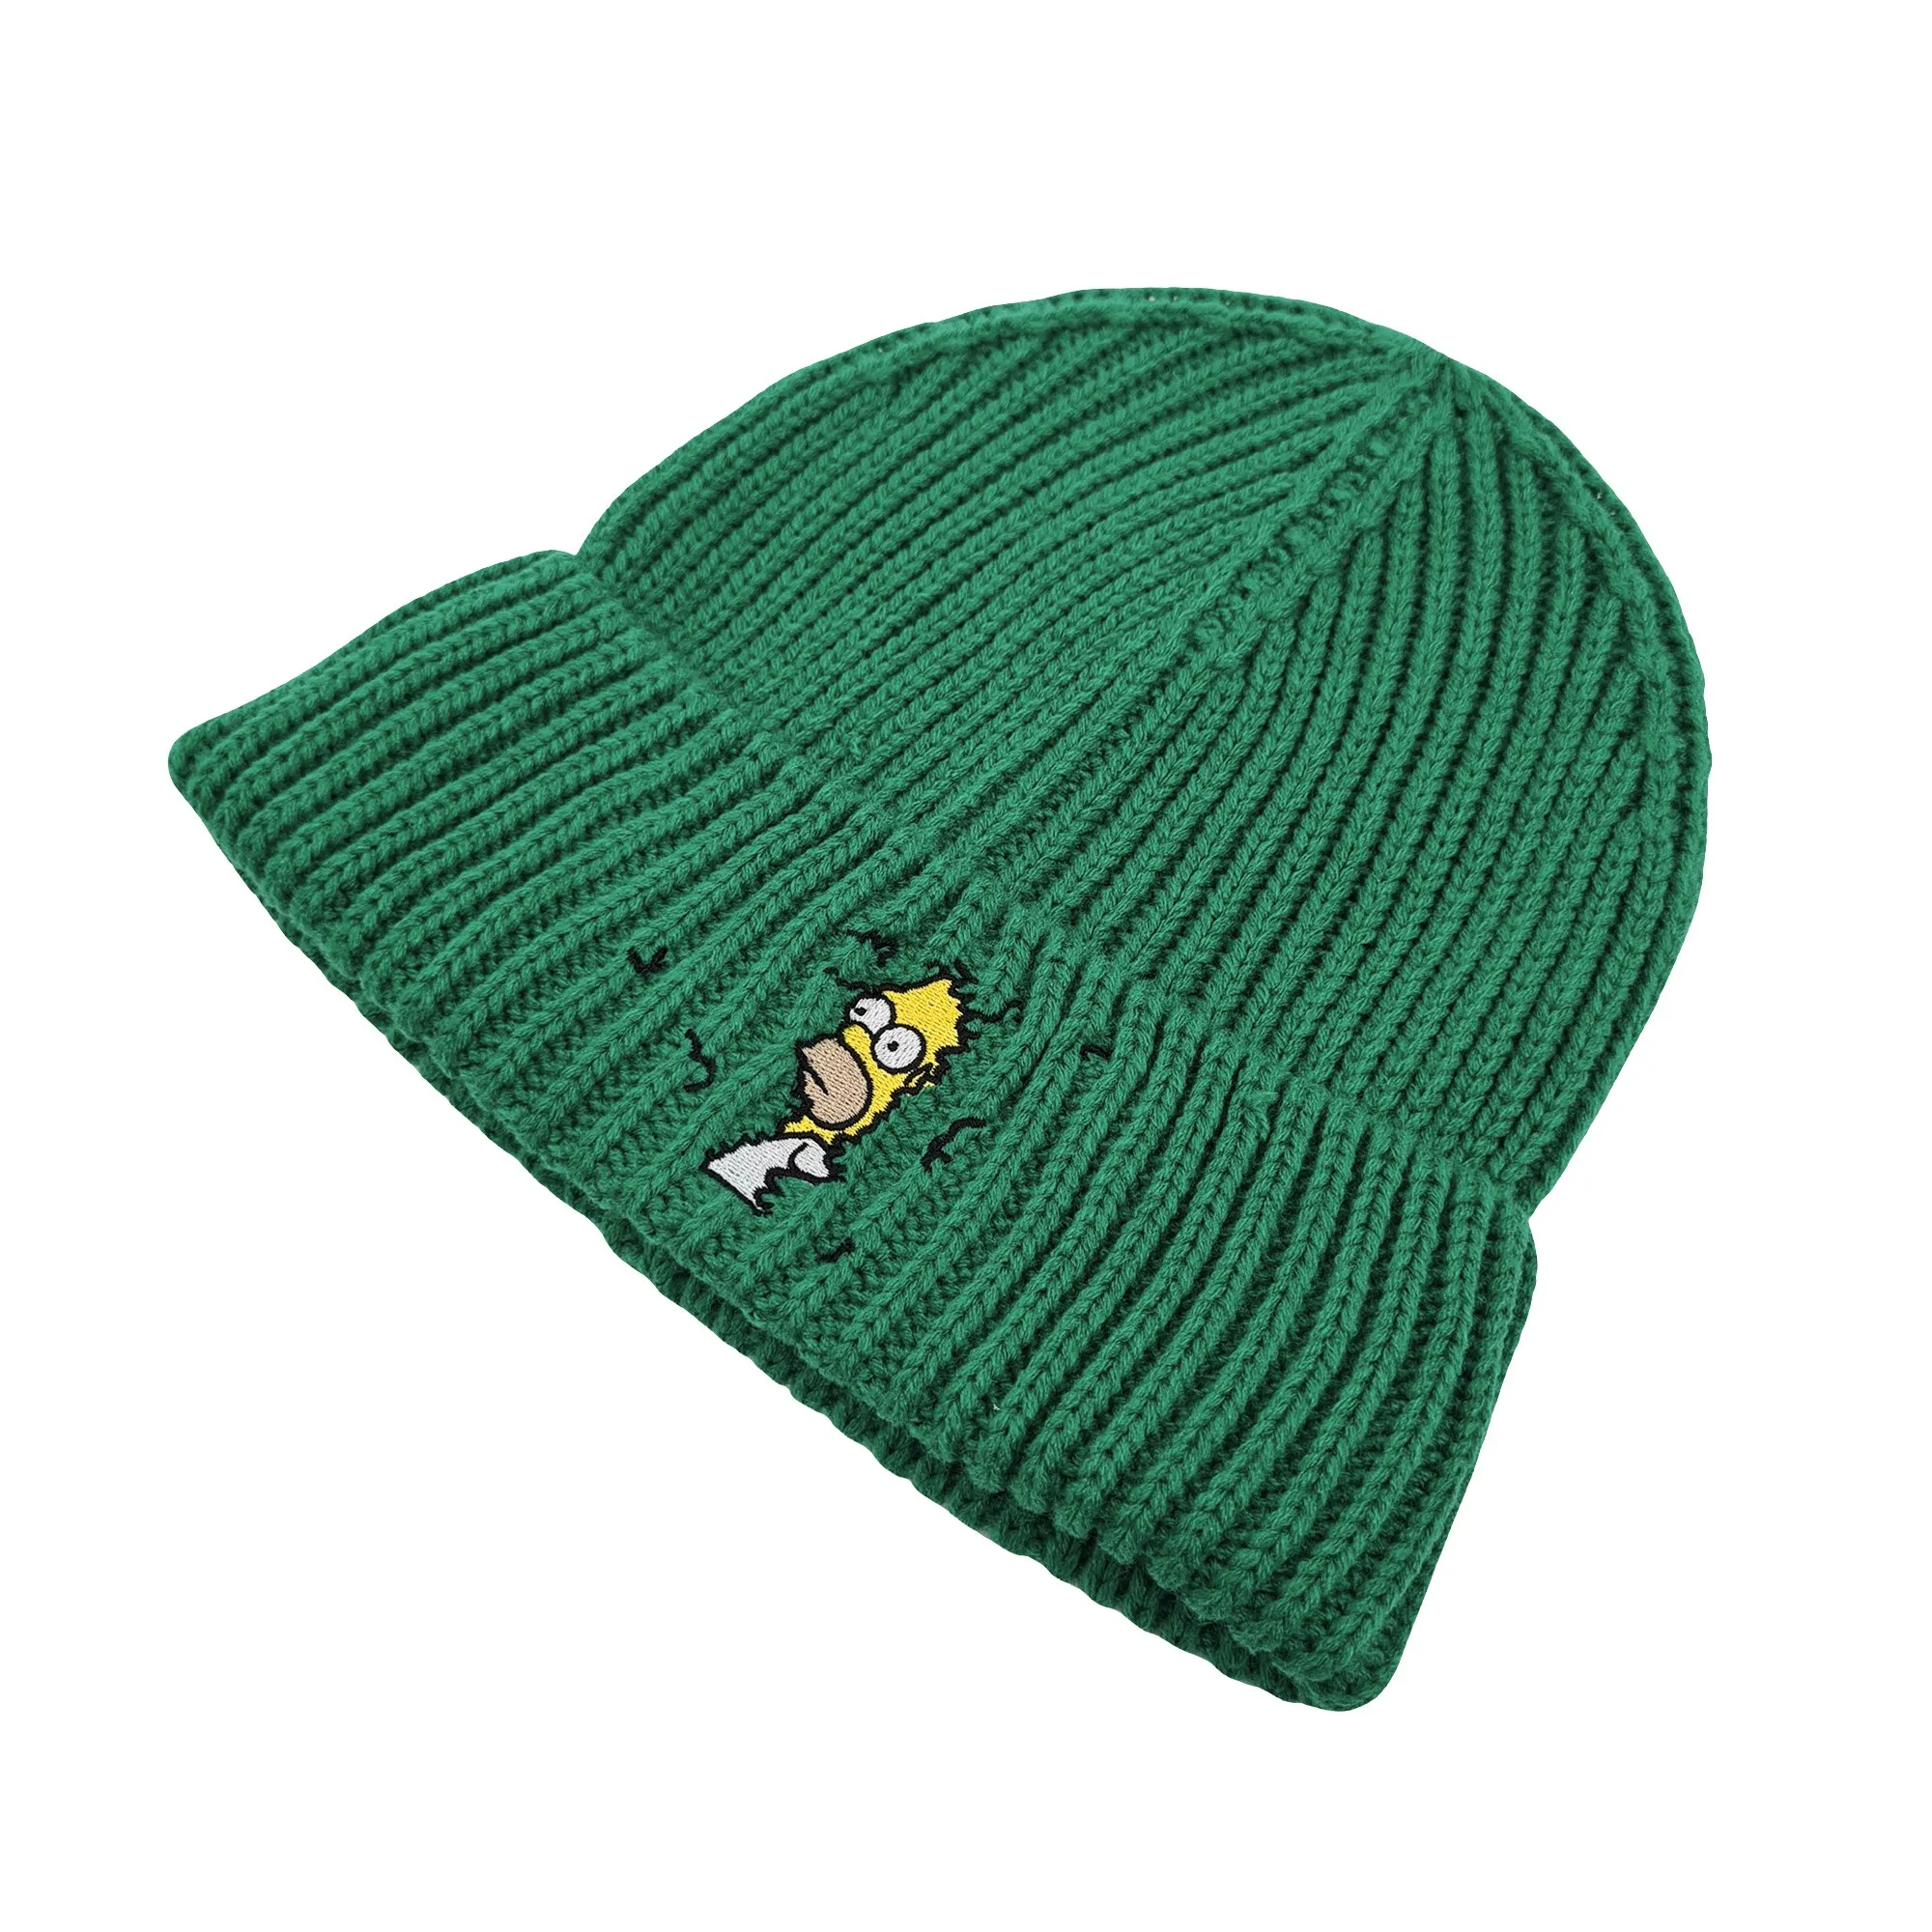 HEDGES GREEN KNIT BEANIE